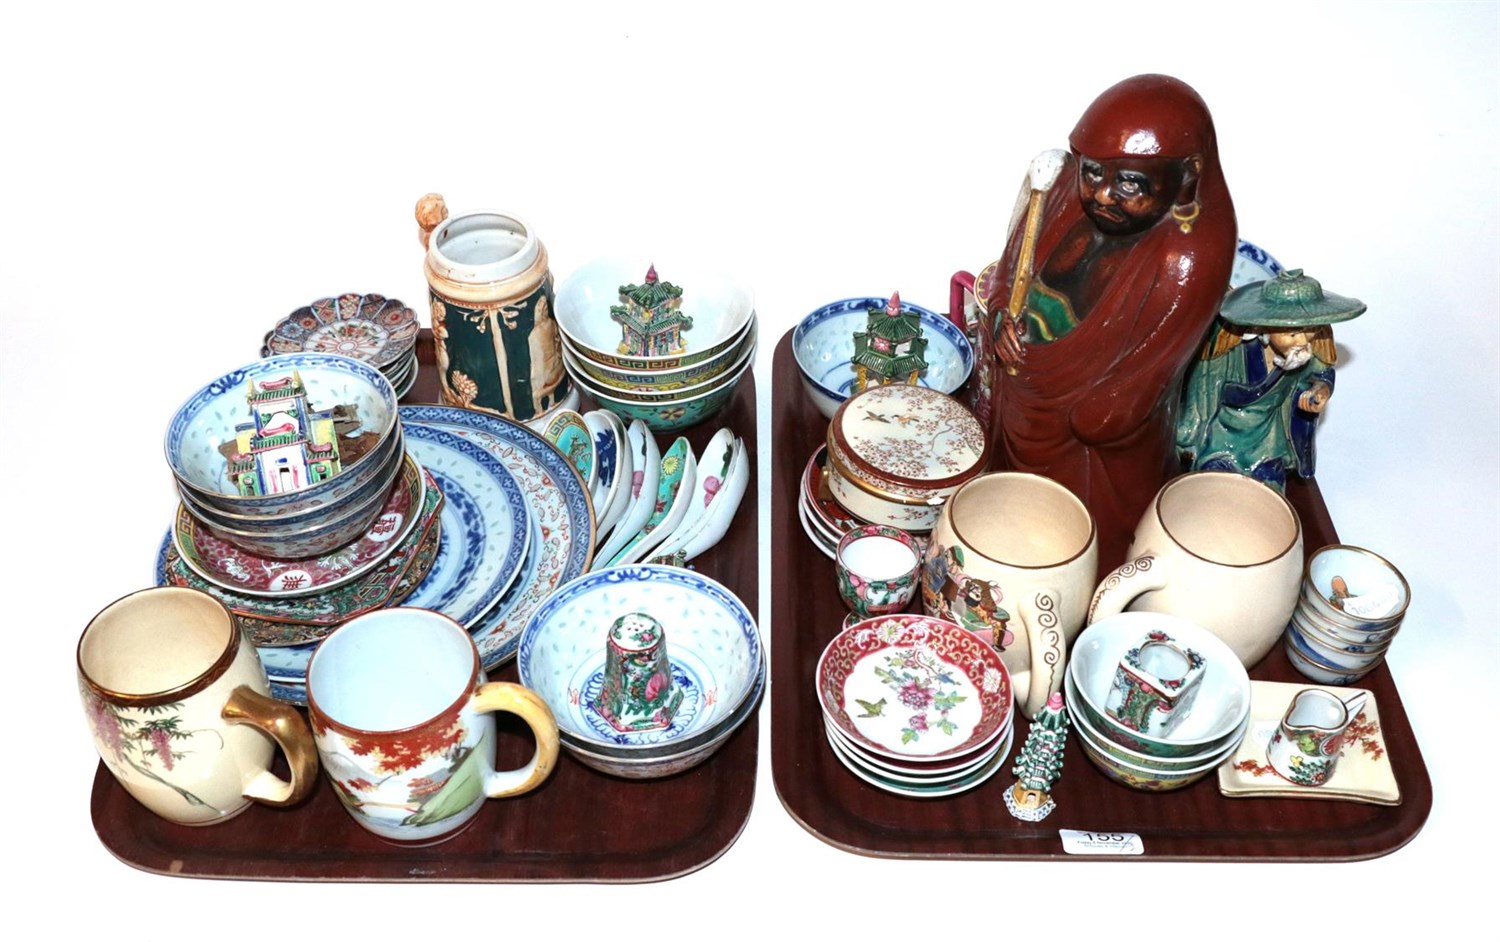 Lot 155 - Assorted Chinese and Japanese pottery and porcelain, 20th century in date, including dishes, bowls